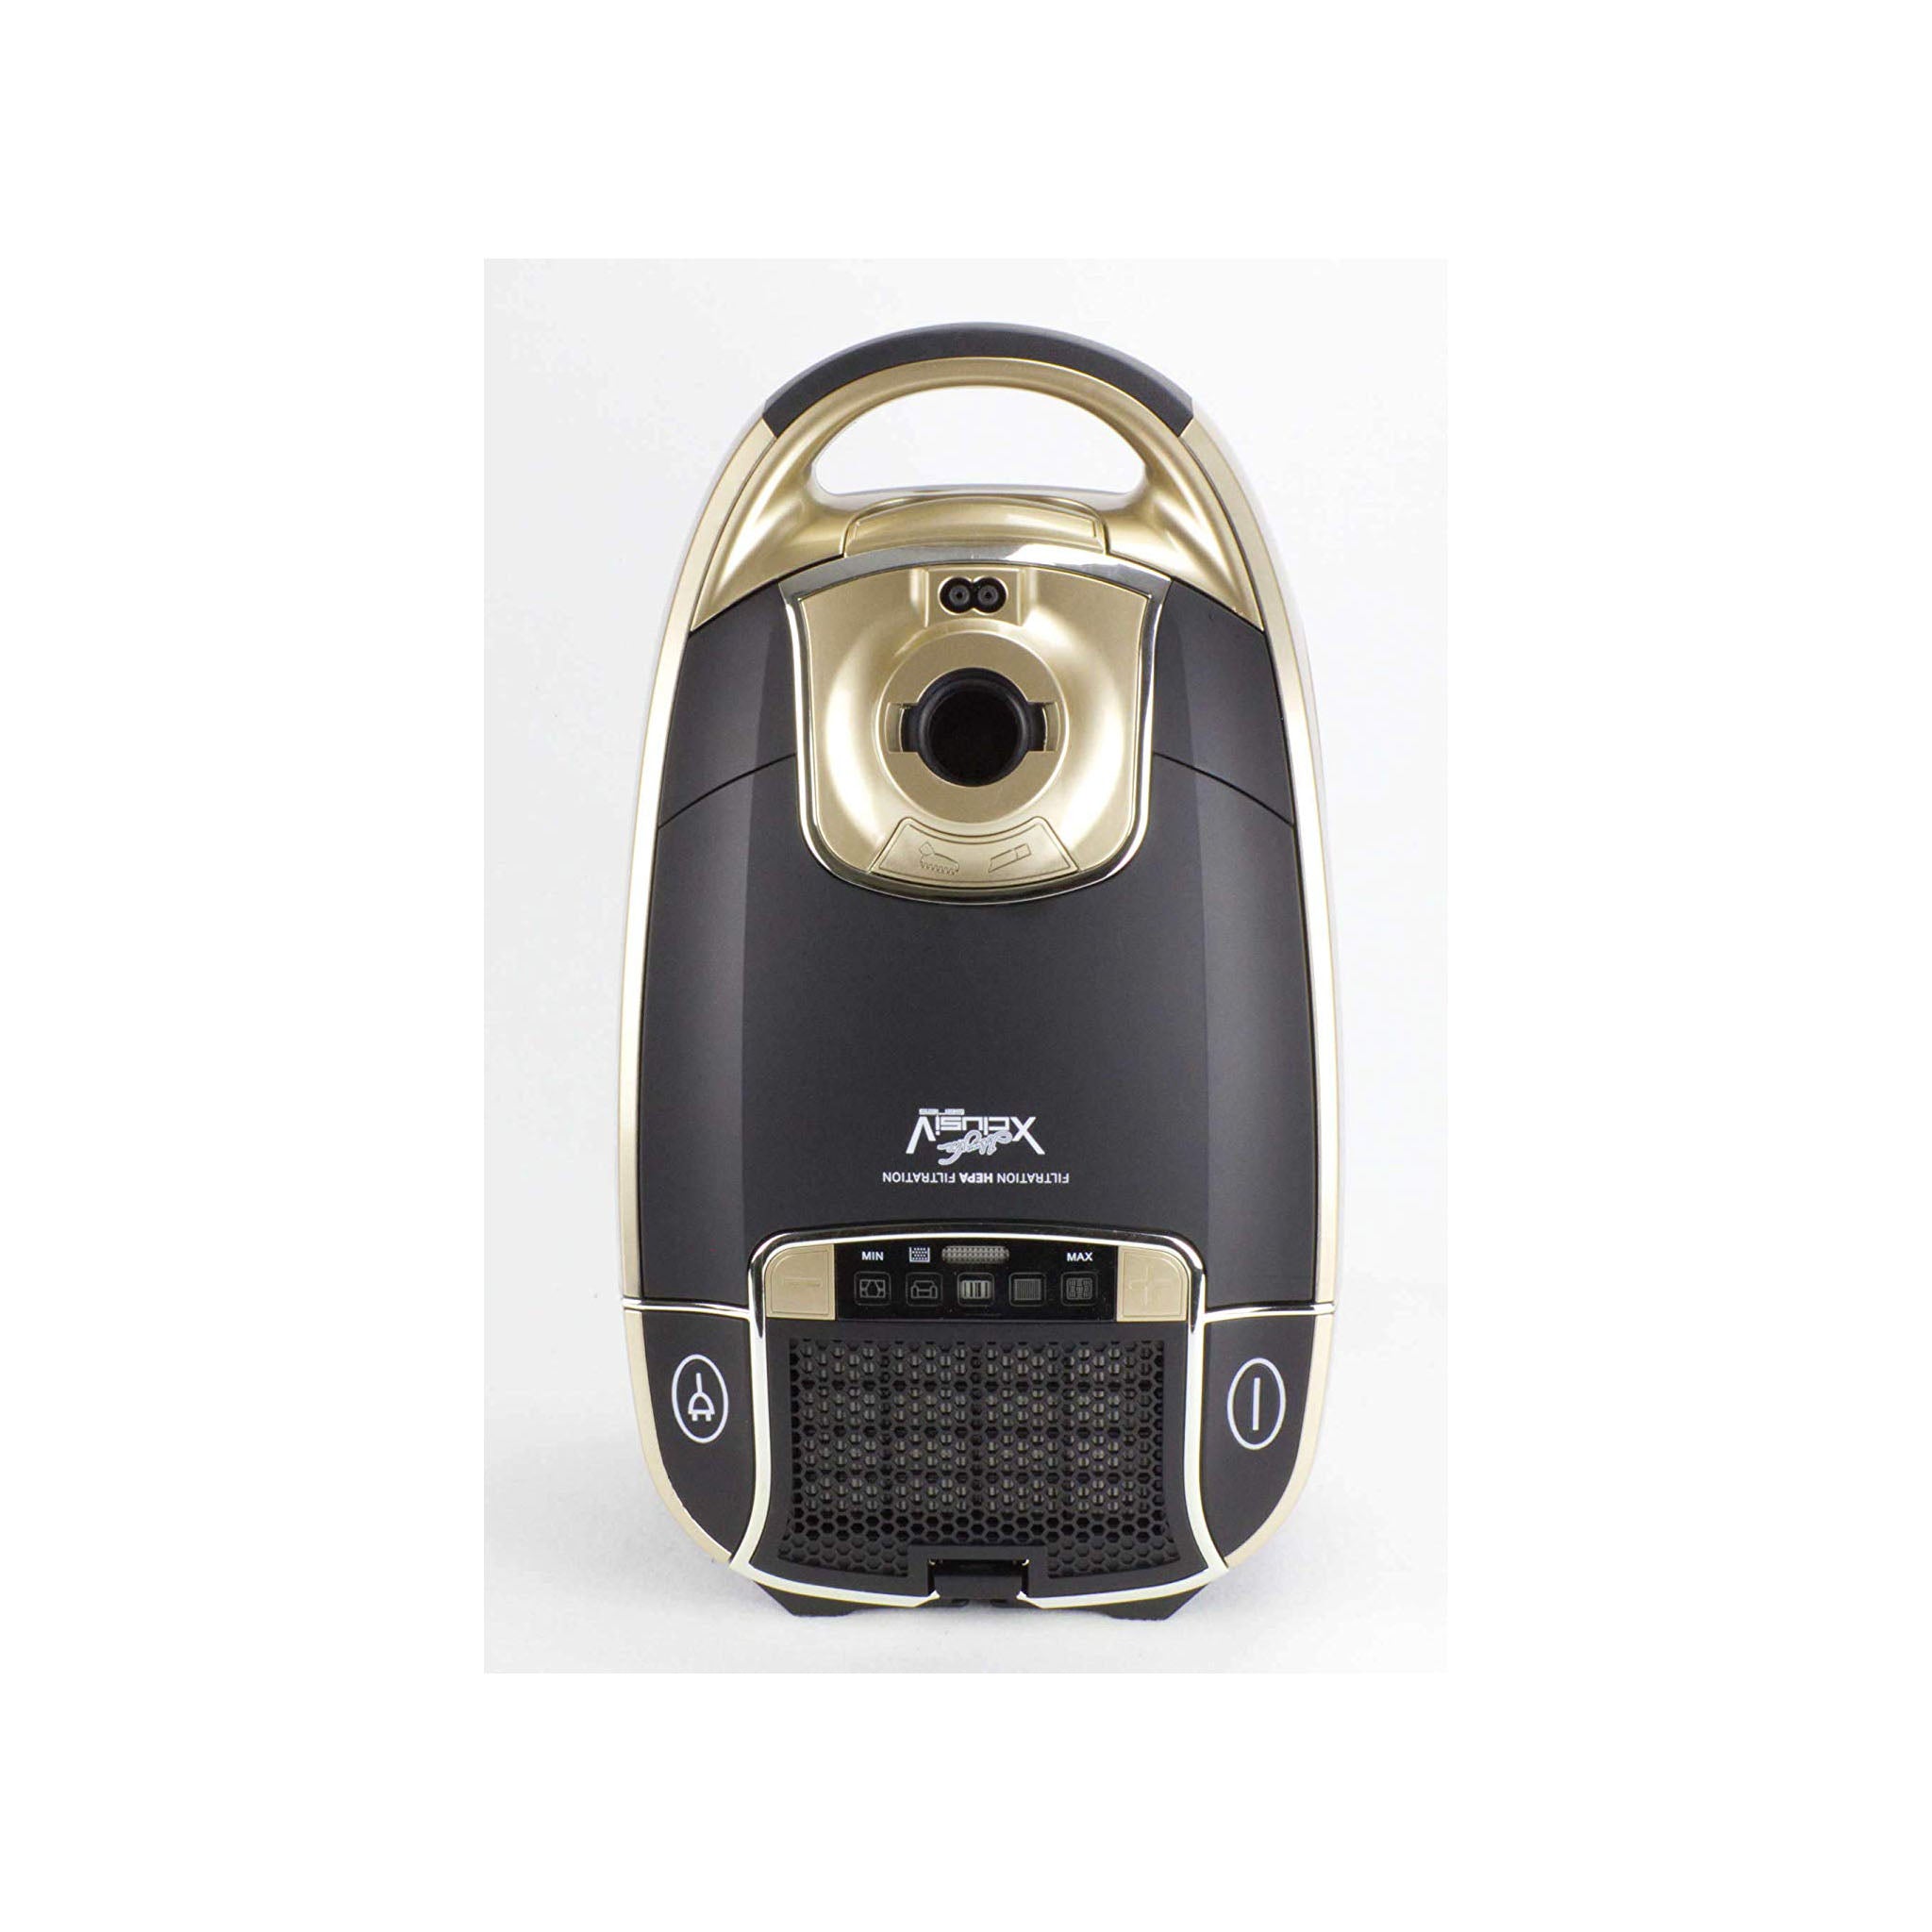 Johnny Vac XV10 Plus Full Size Canister Vacuum Cleaner - Top View